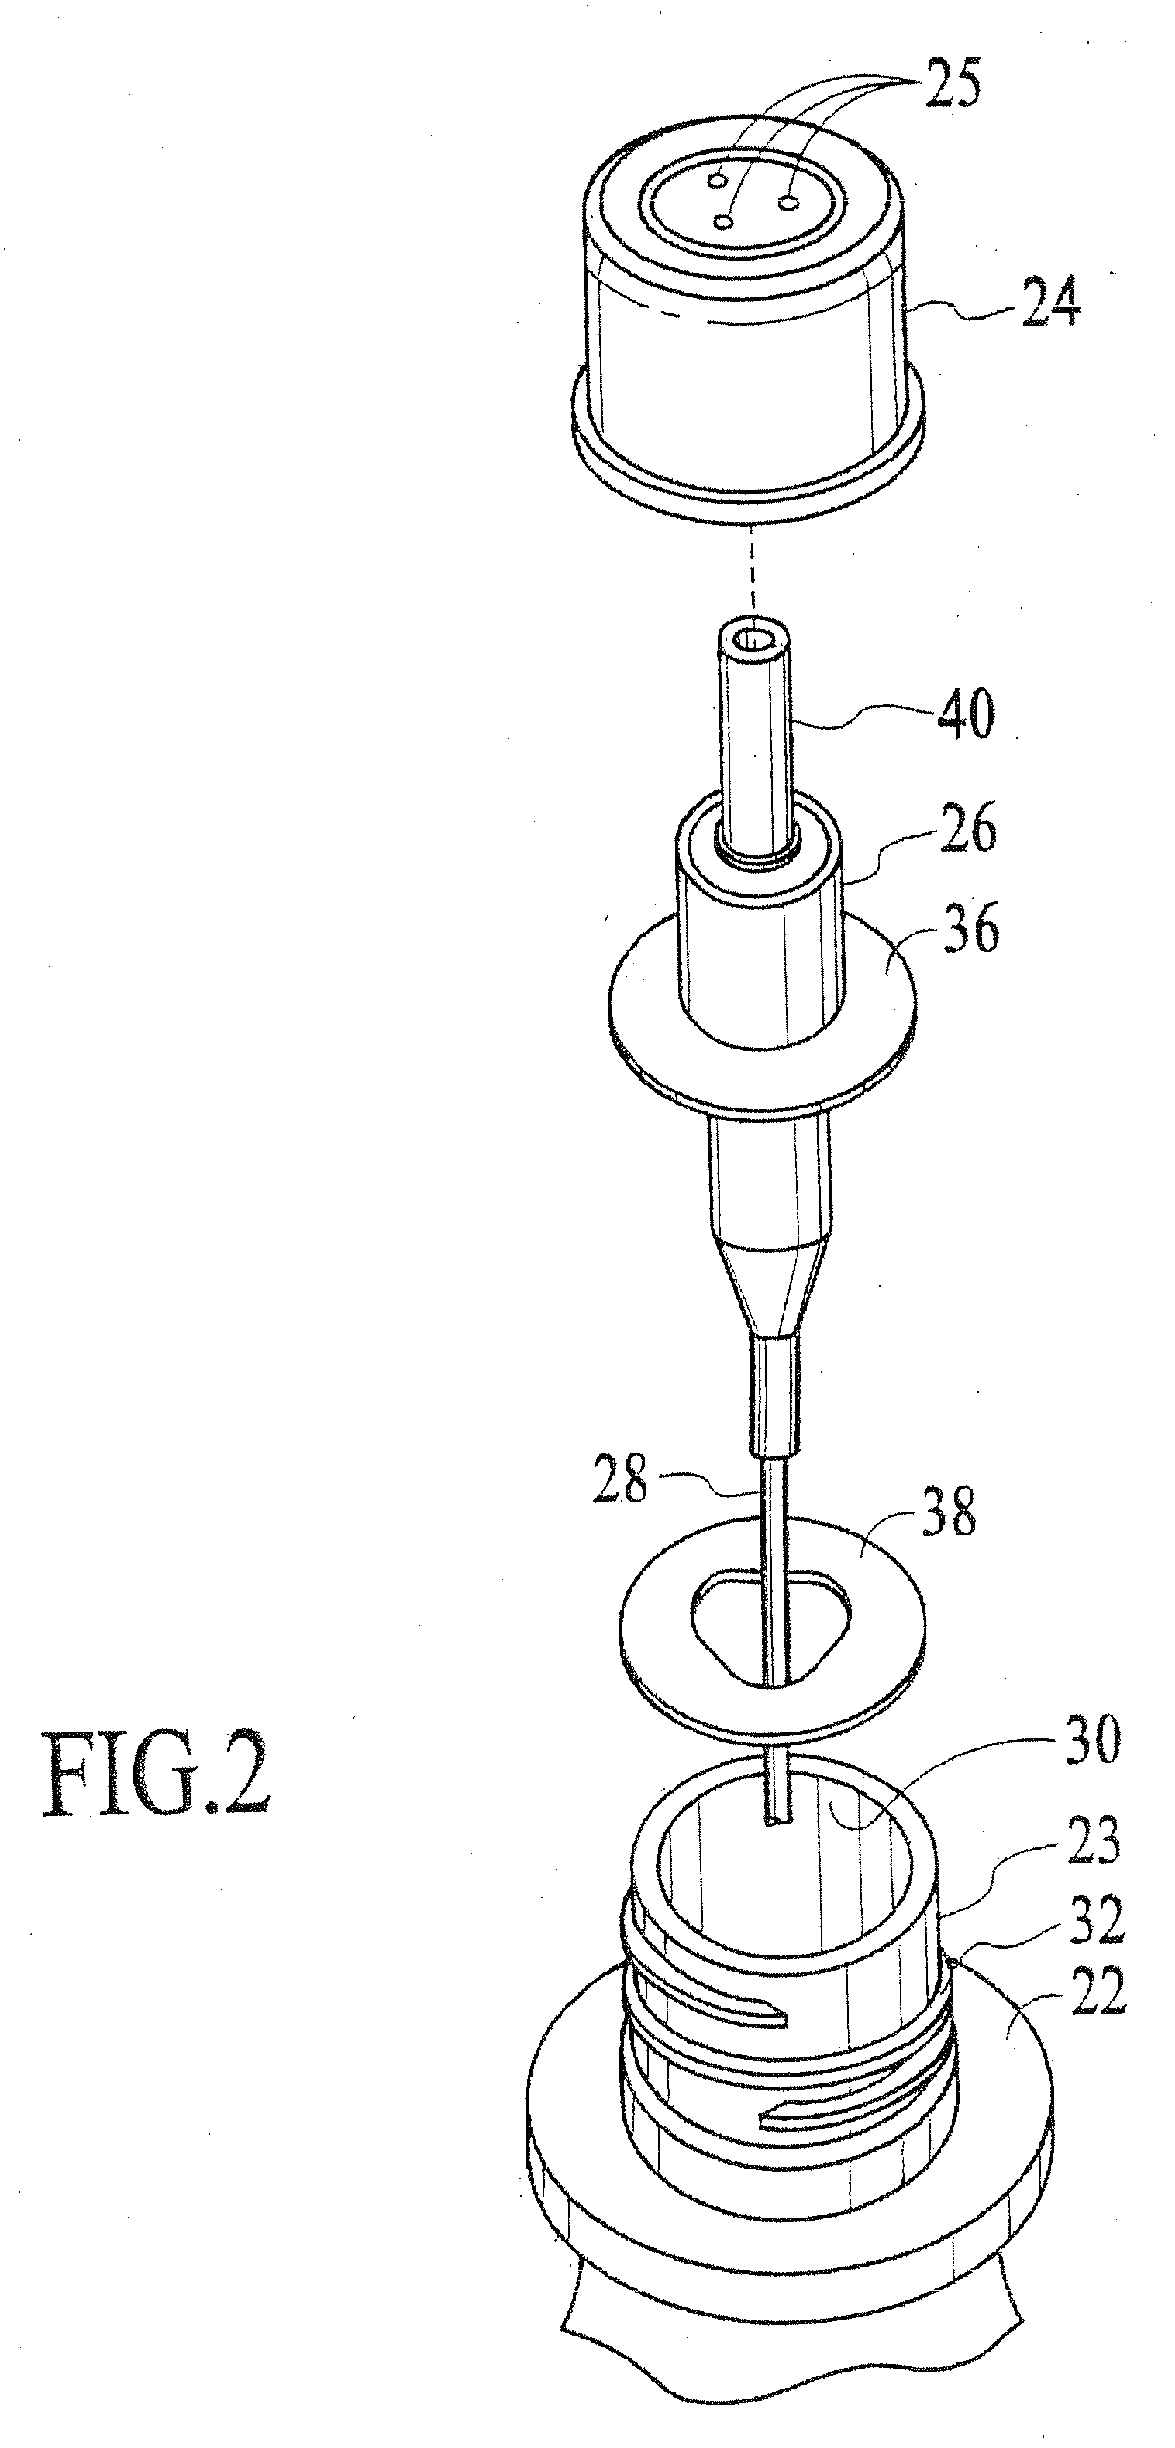 Sensory Cue For Pump Dispenser For Use With Substrates